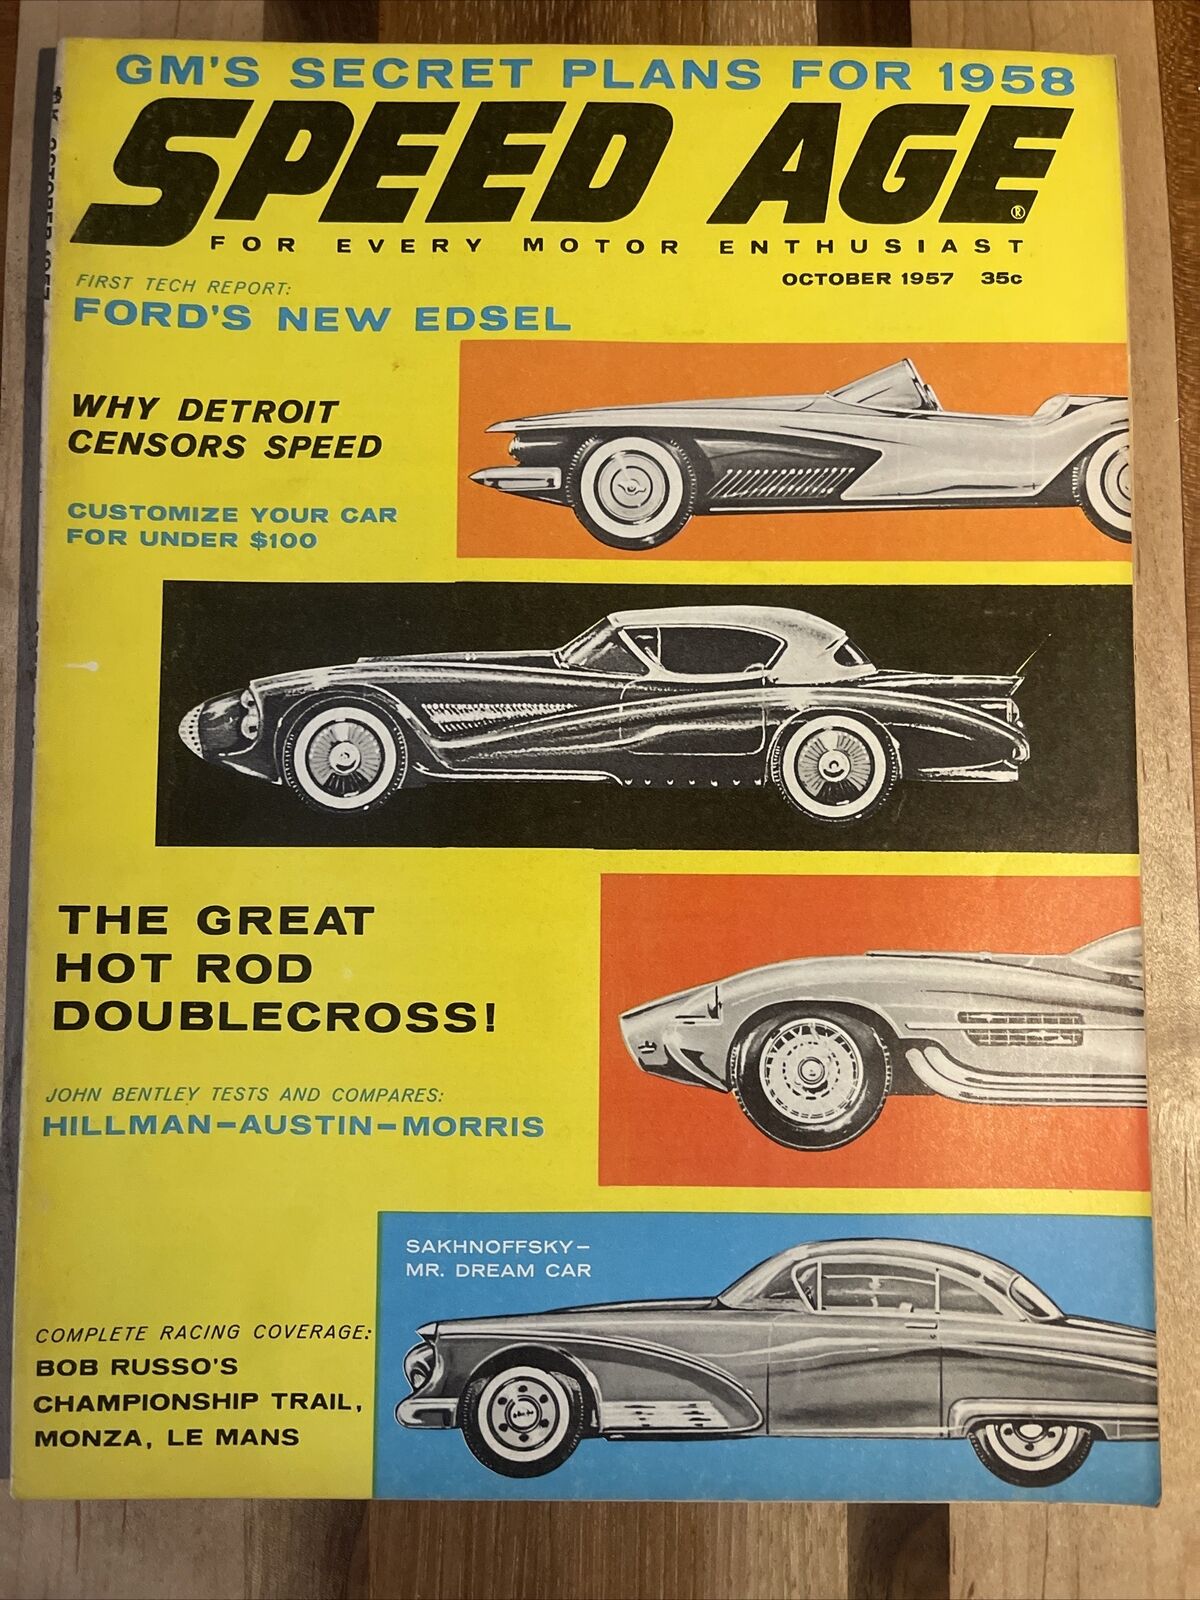 1957 Speed Age Magazine, New York Sorts Car Racing Article